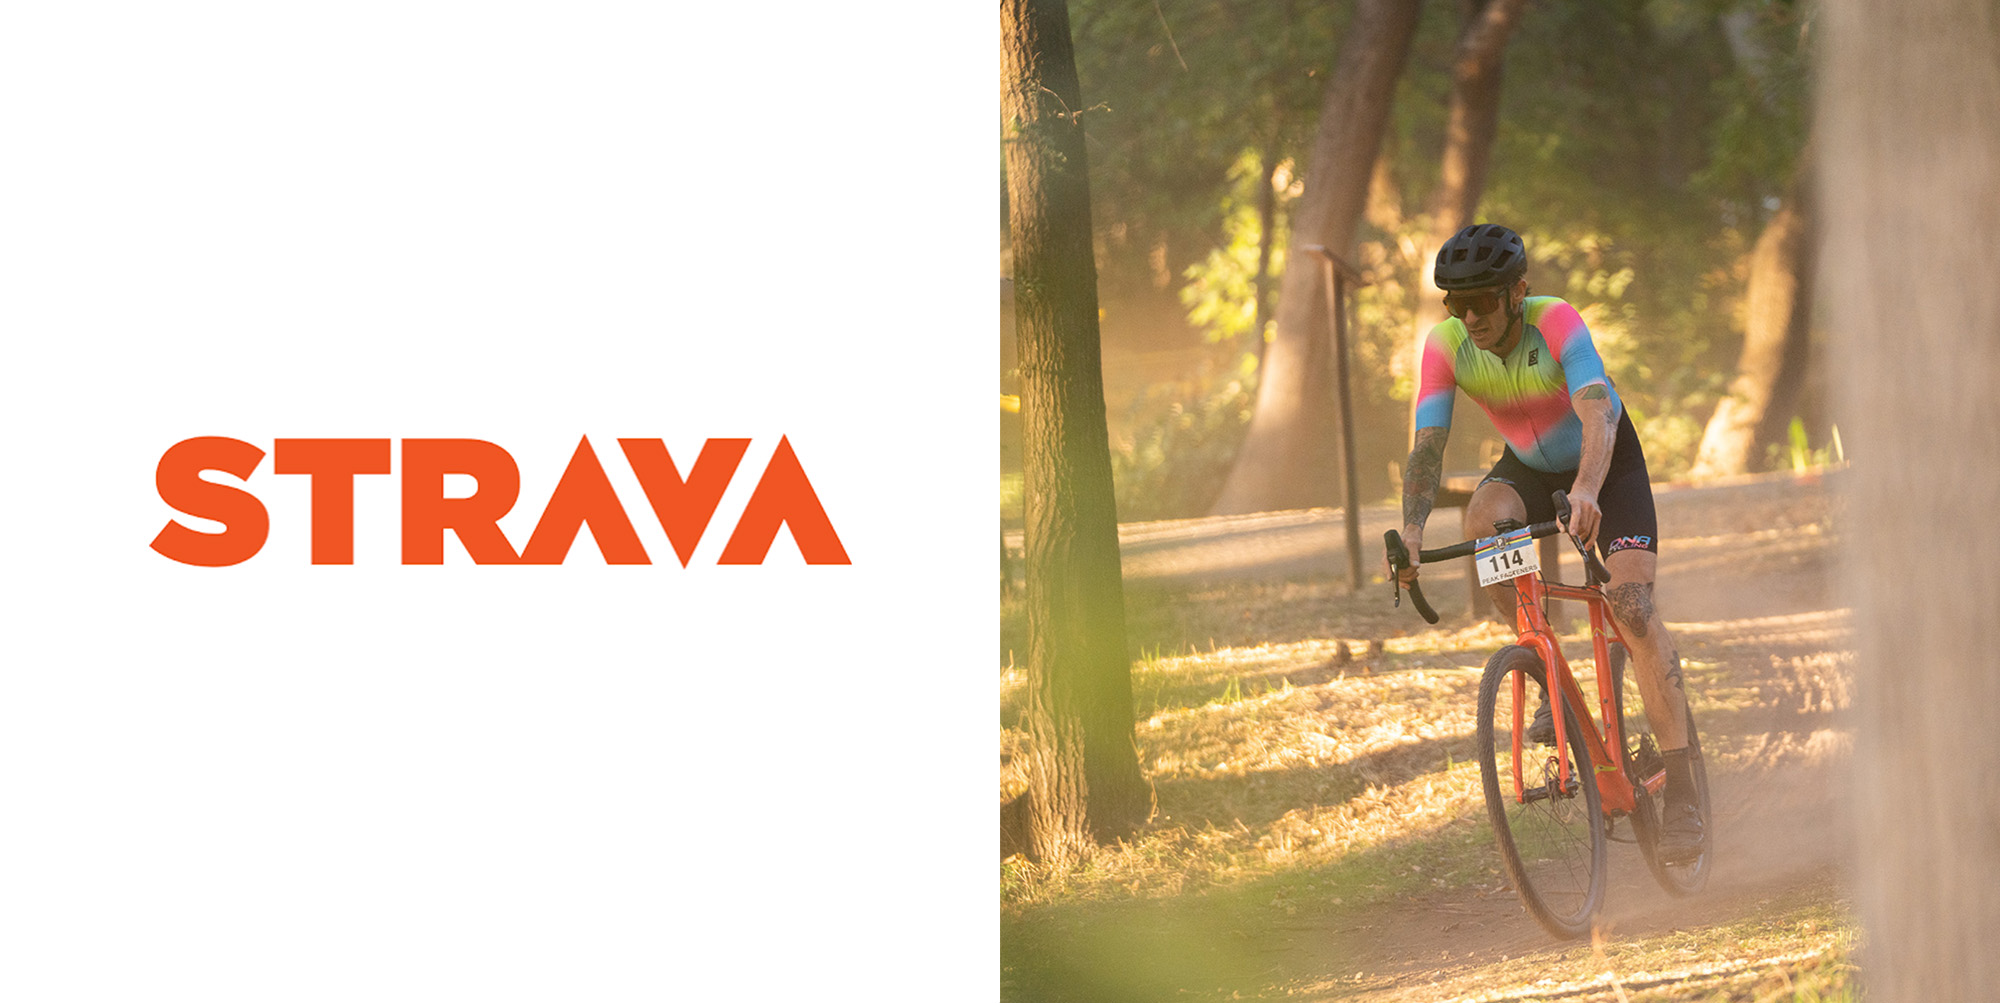 strava square with racer